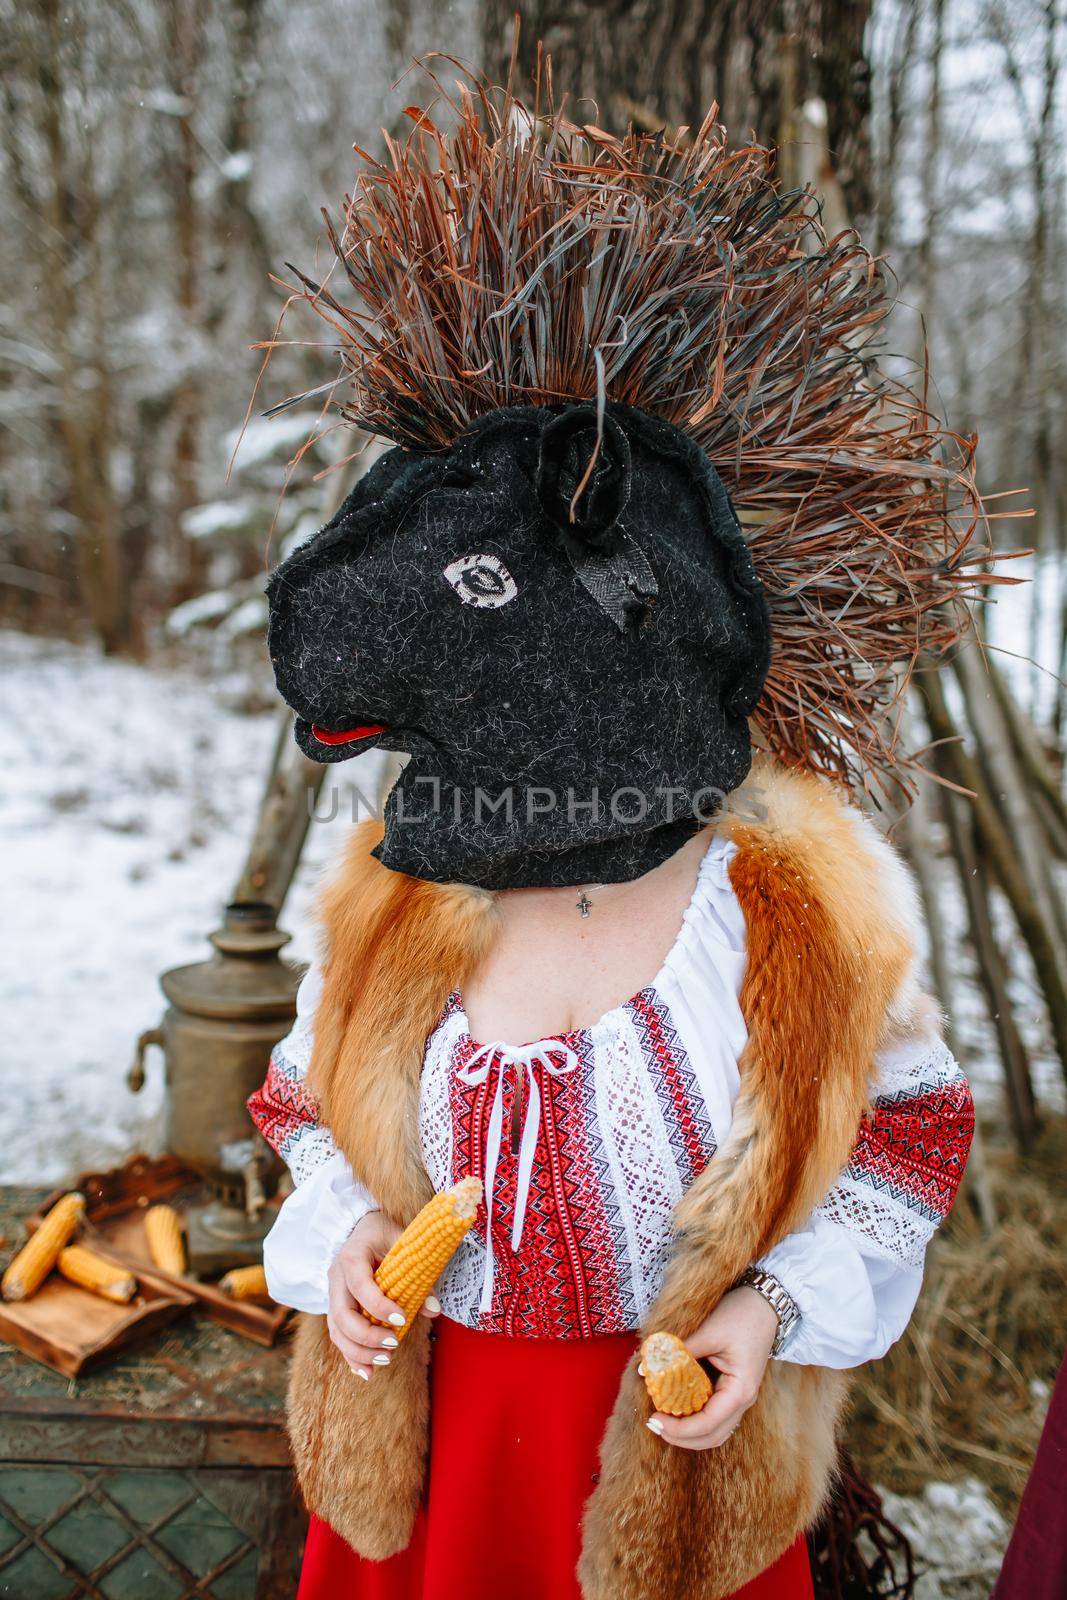 A man in a national costume with the head of an animal celebrates the arrival of the pagan holiday Maslenitsa. An ancient pagan rite by deandy